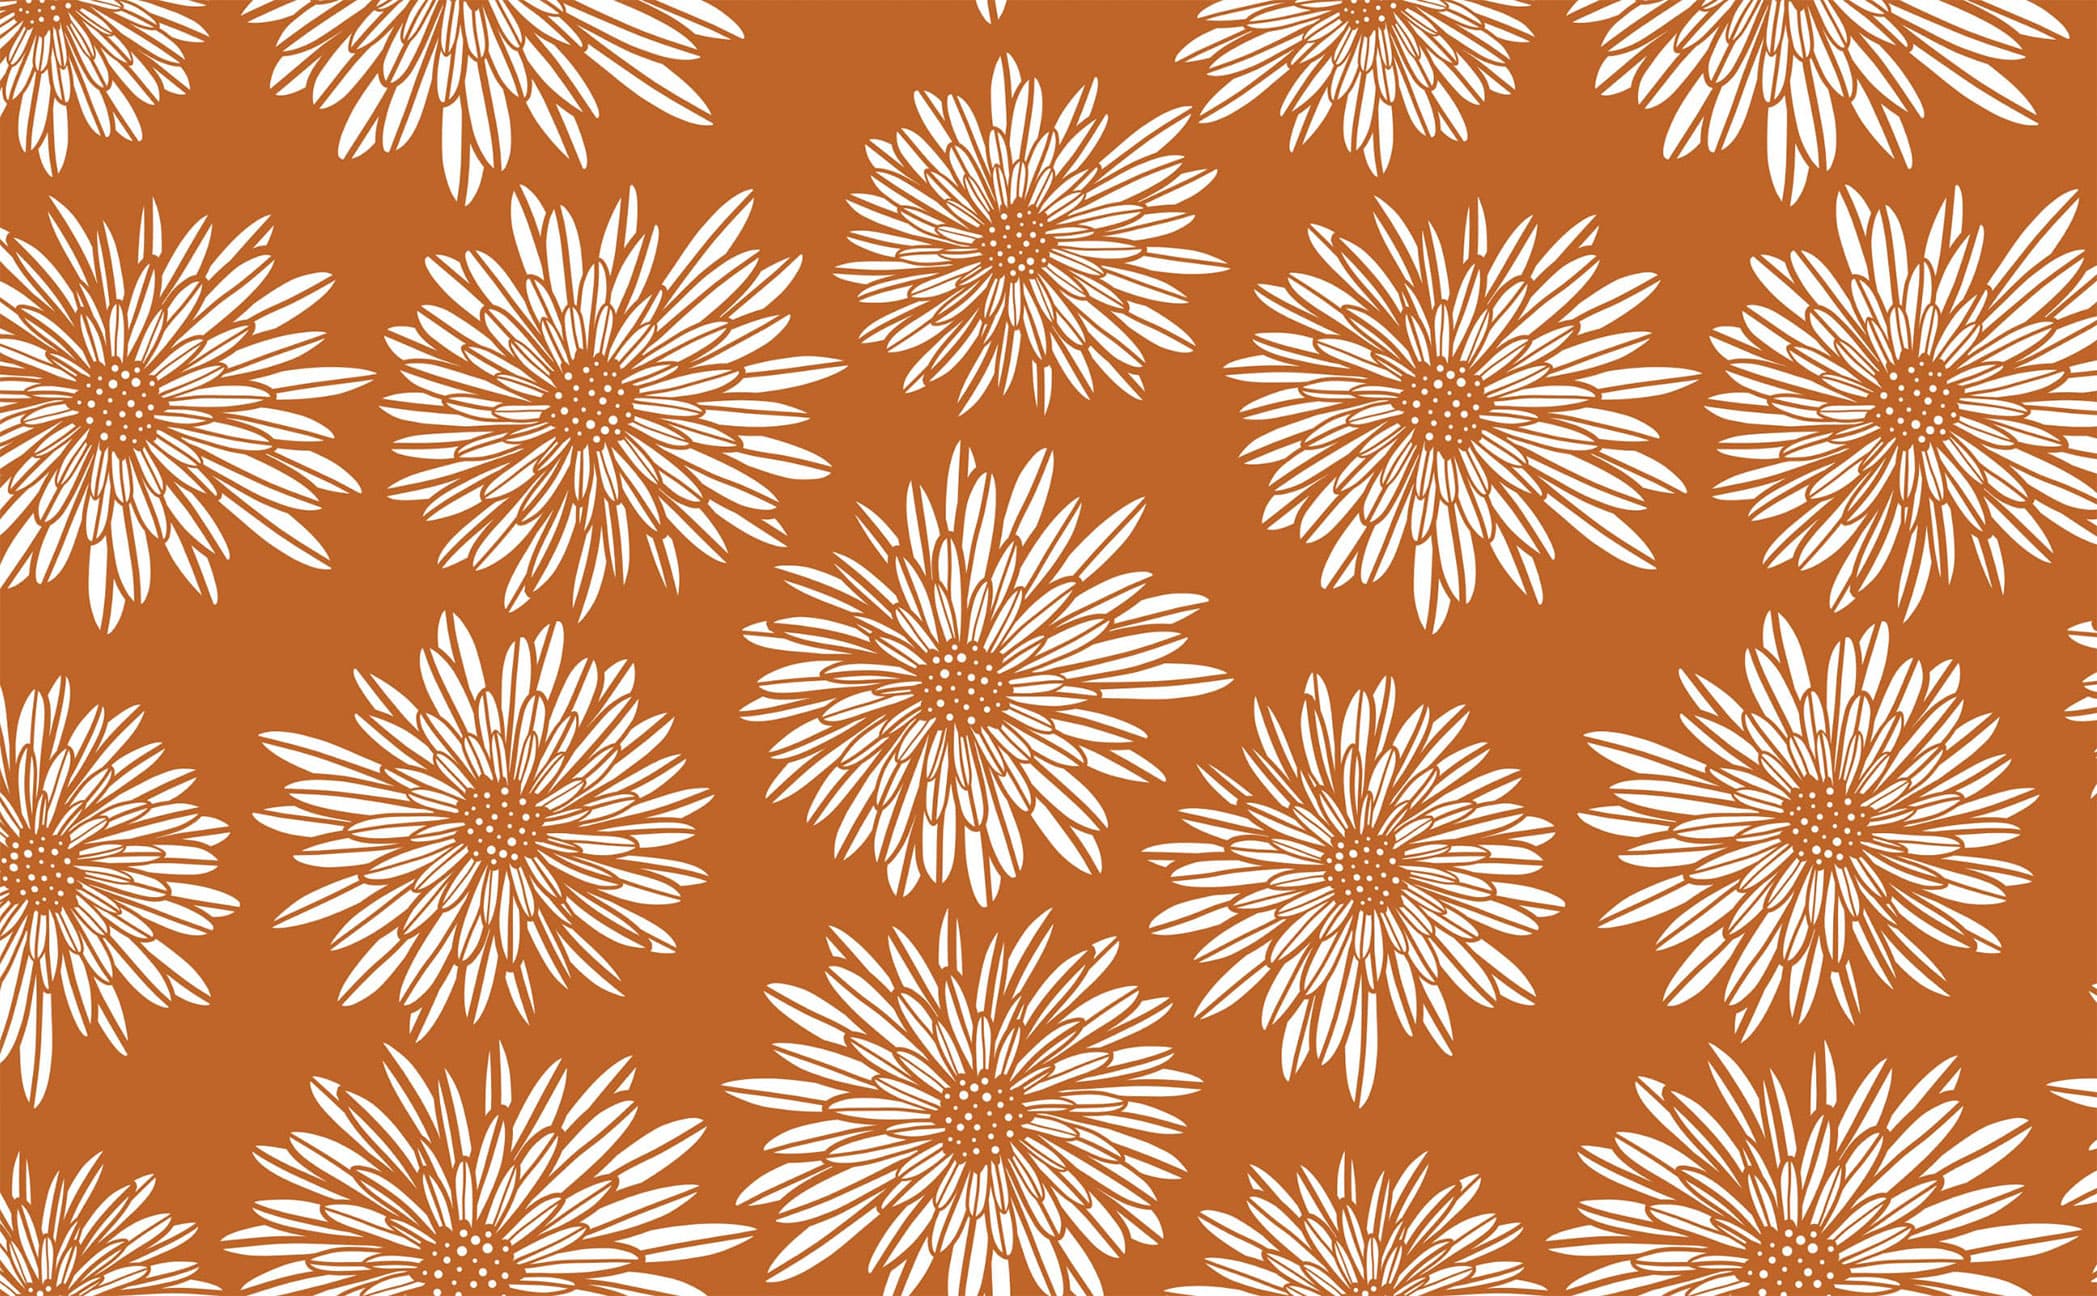 Beautiful red daisy flower on pastel brown background. Aesthetic